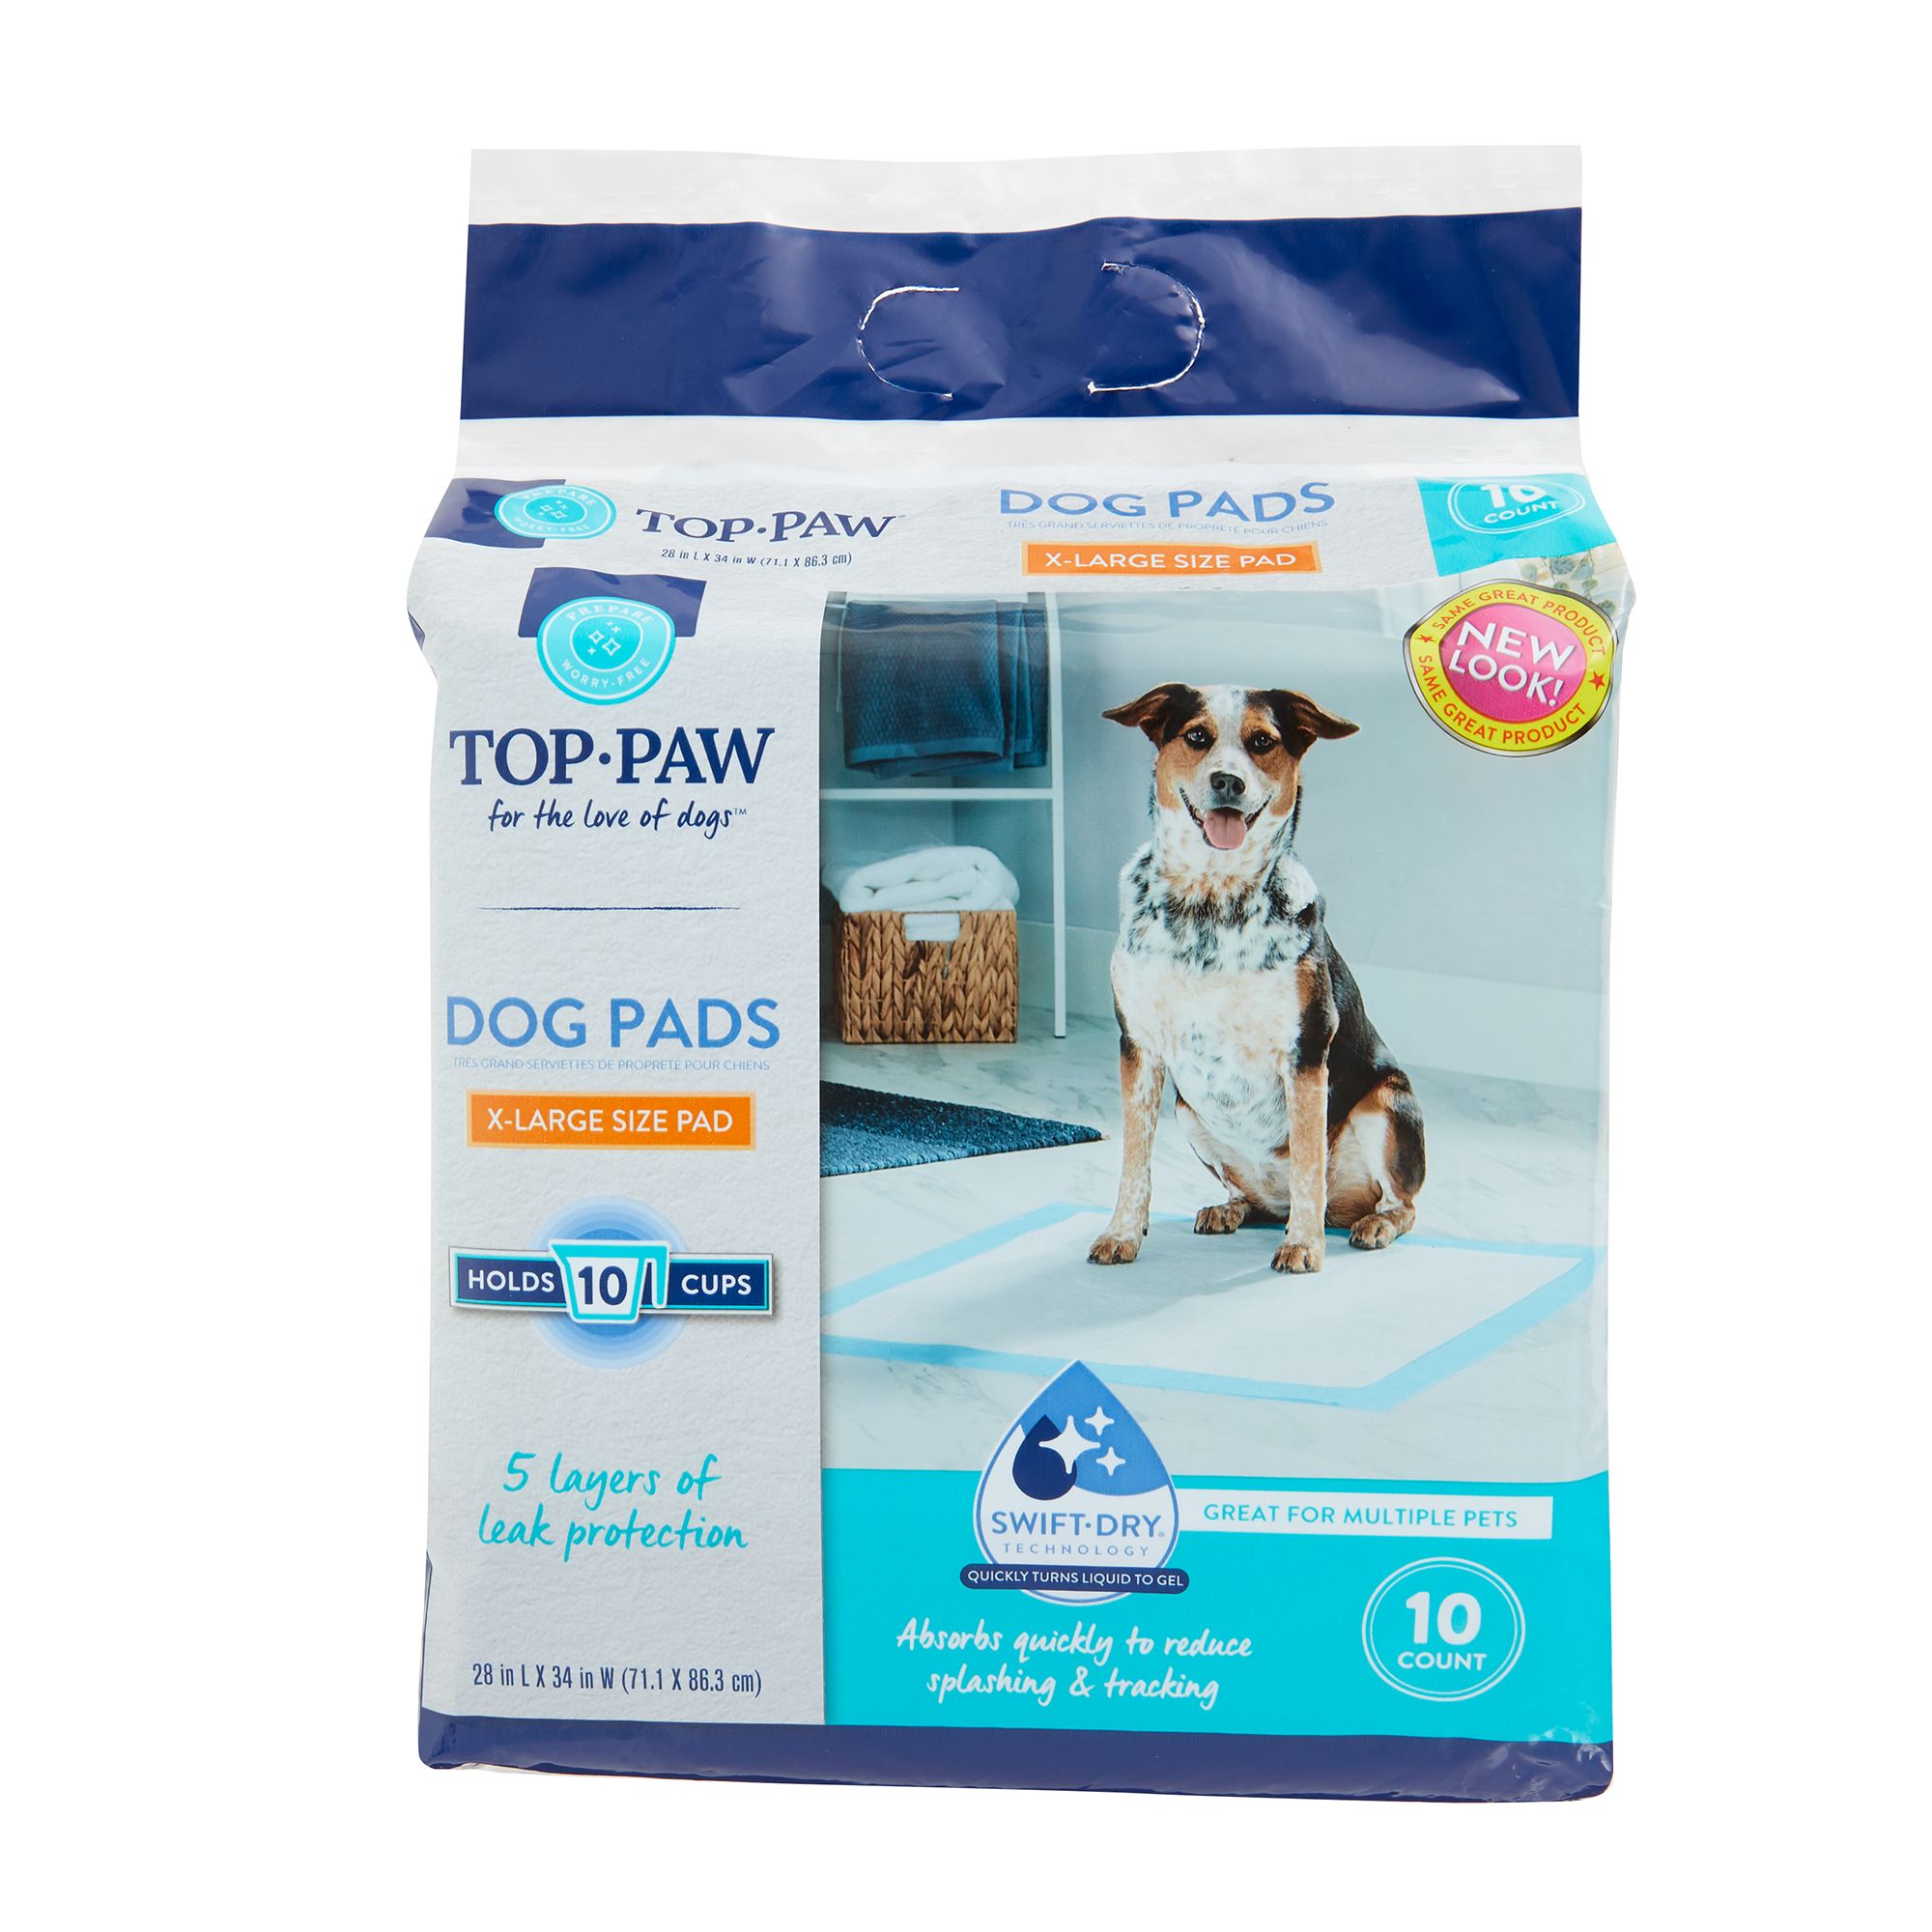 dog diapers for females in heat petsmart